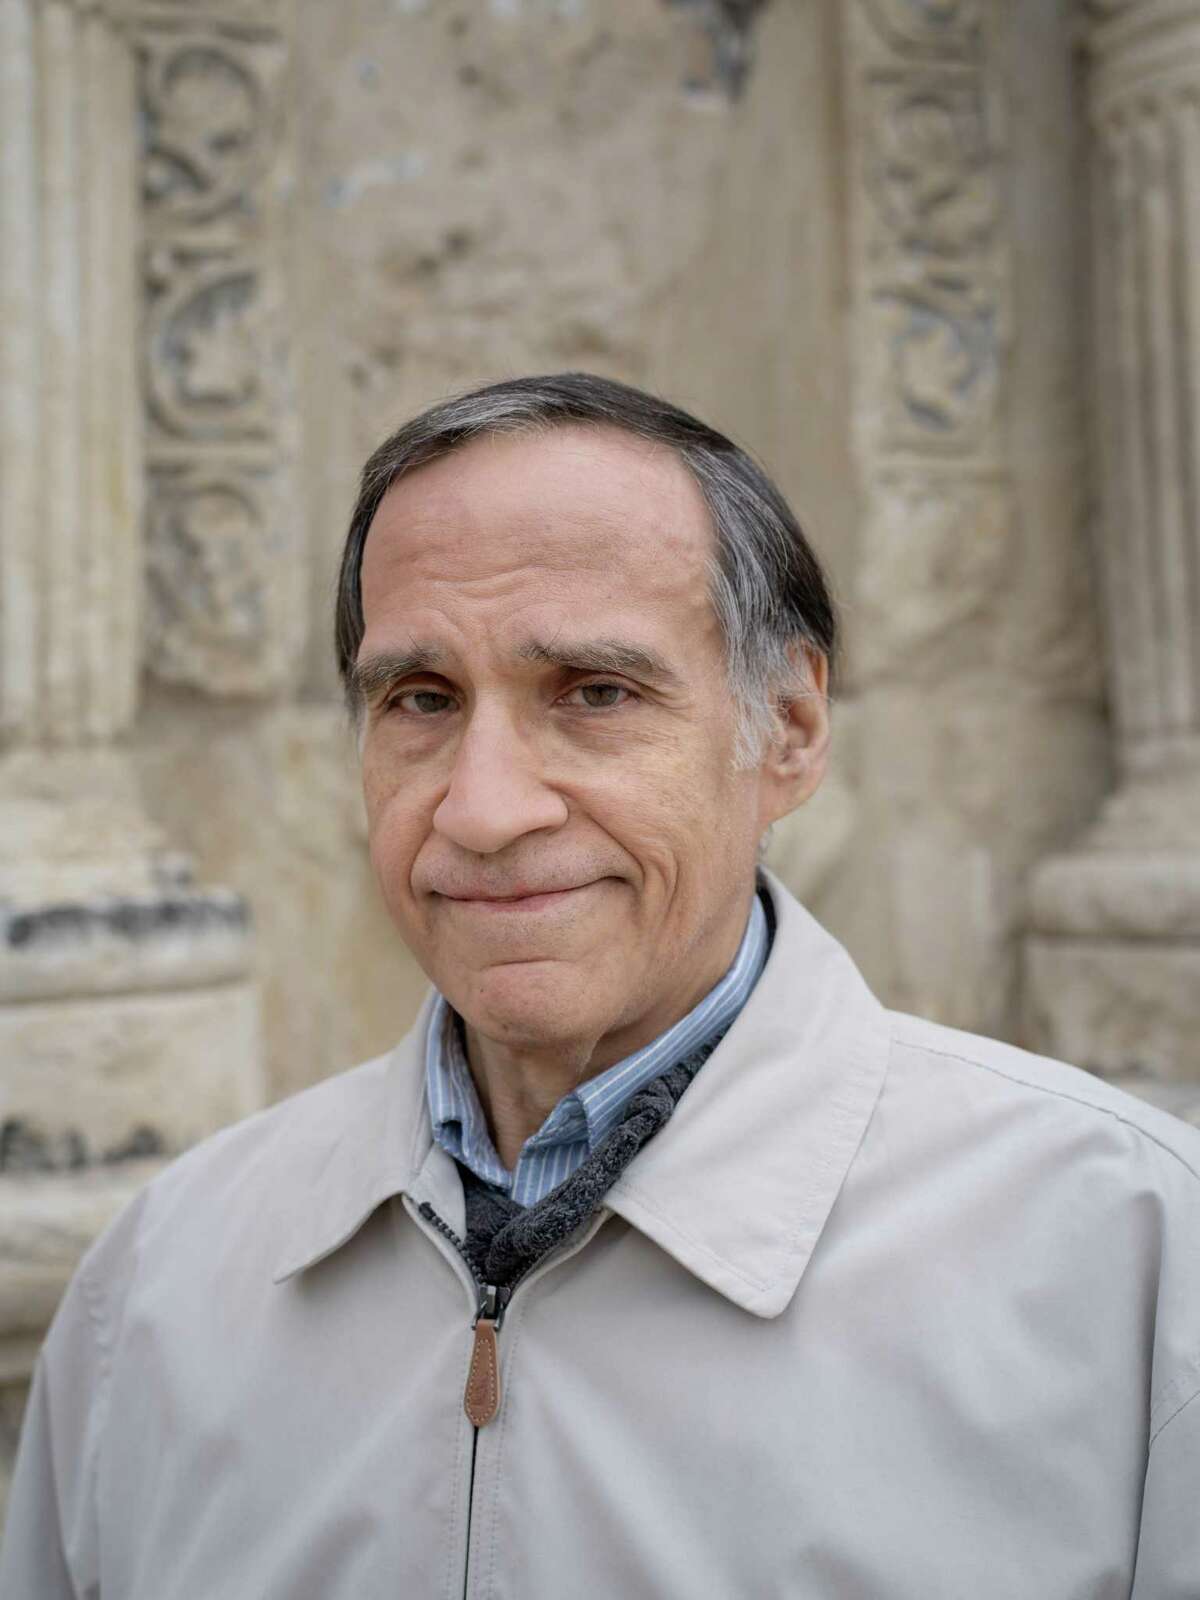 Gary Zaboly, an historical artist and illustrator, poses for a portrait in front of an Alamo niche where statues of saints used to be housed, in Alamo Plaza where representations of his work are displayed on Monday, February 25, 2019. Zaboly has been depicting the Alamo, its occupants, defenders and attackers in his work since the 1990s. Many of his works are owned and displayed in the Alamo's Wall of History on the premises.